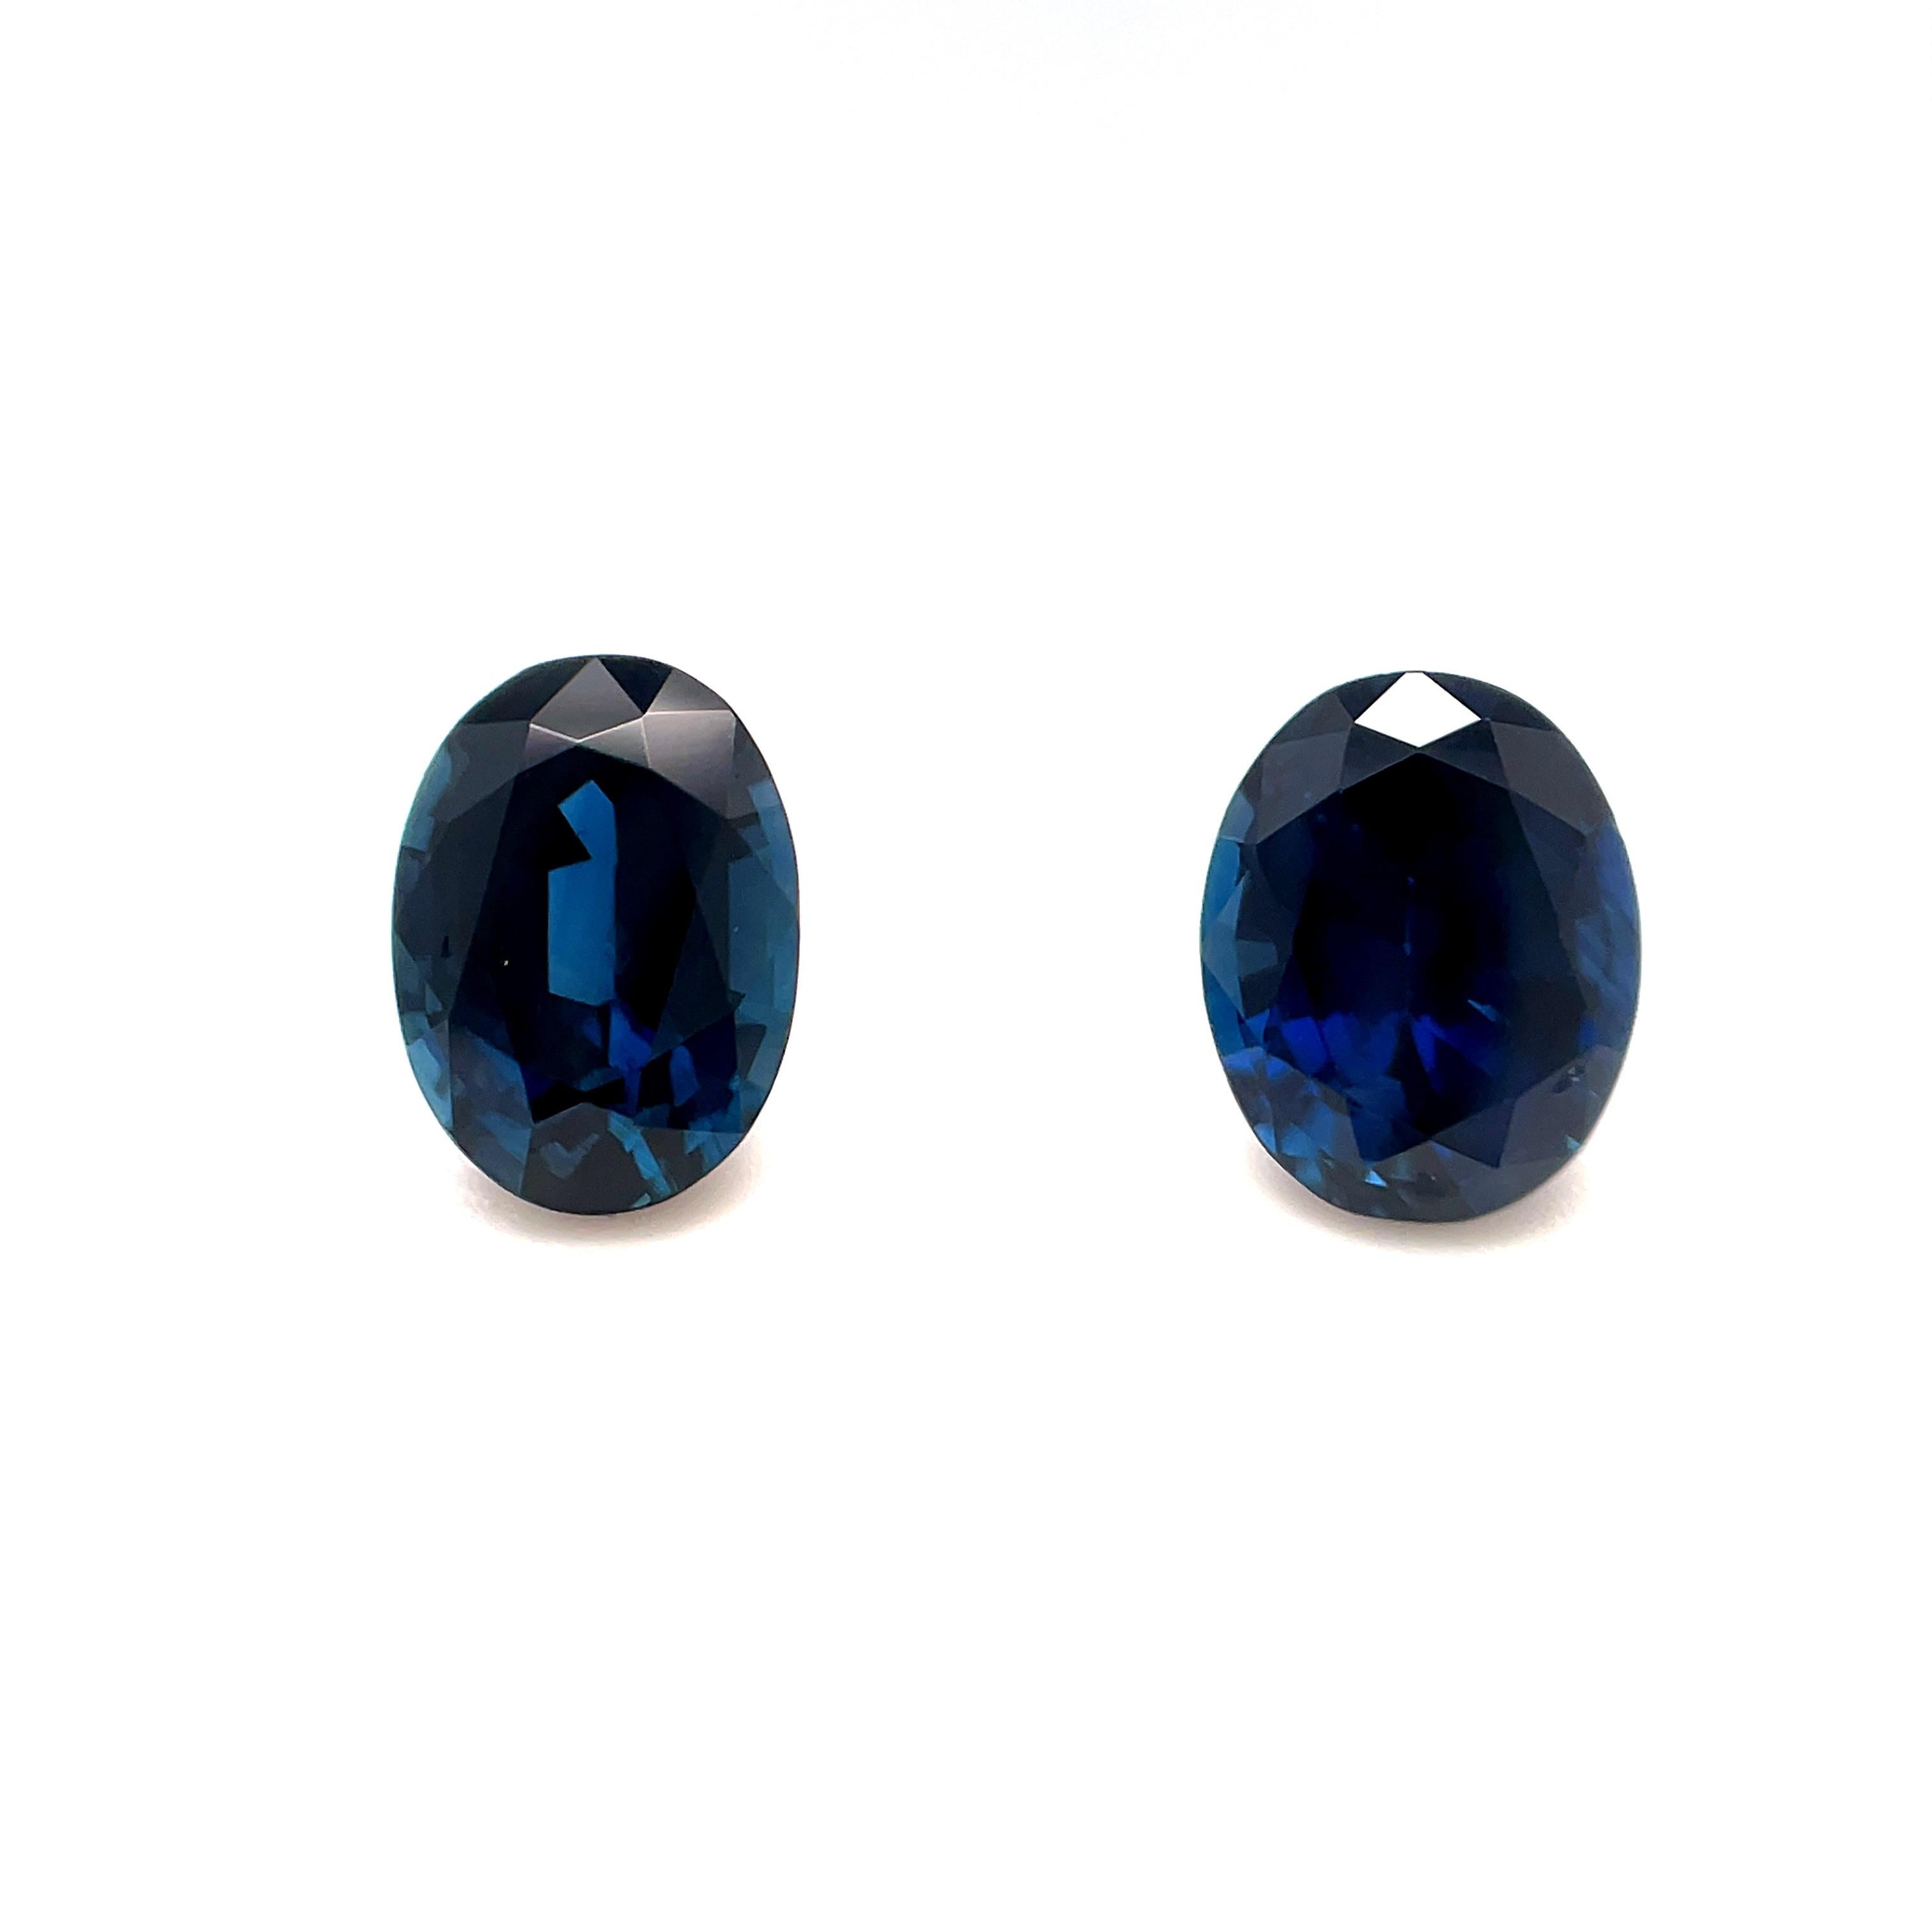  Royal Blue Sapphire Pair, 3.82 Carats Total, Loose Gemstones for Earrings For Sale 2